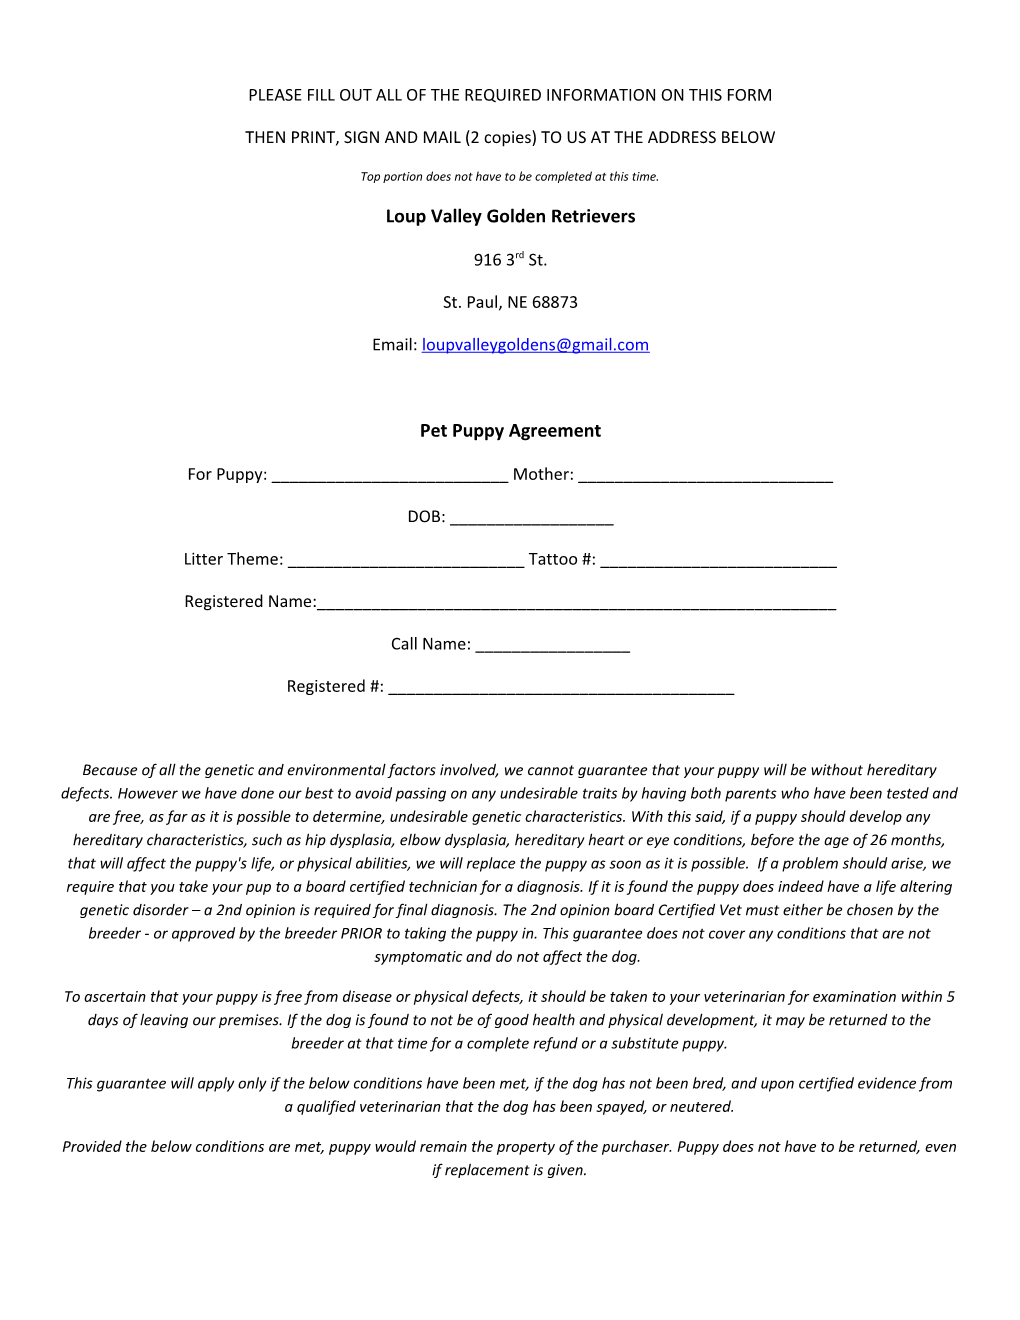 Please Fill out All of the Required Information on This Form